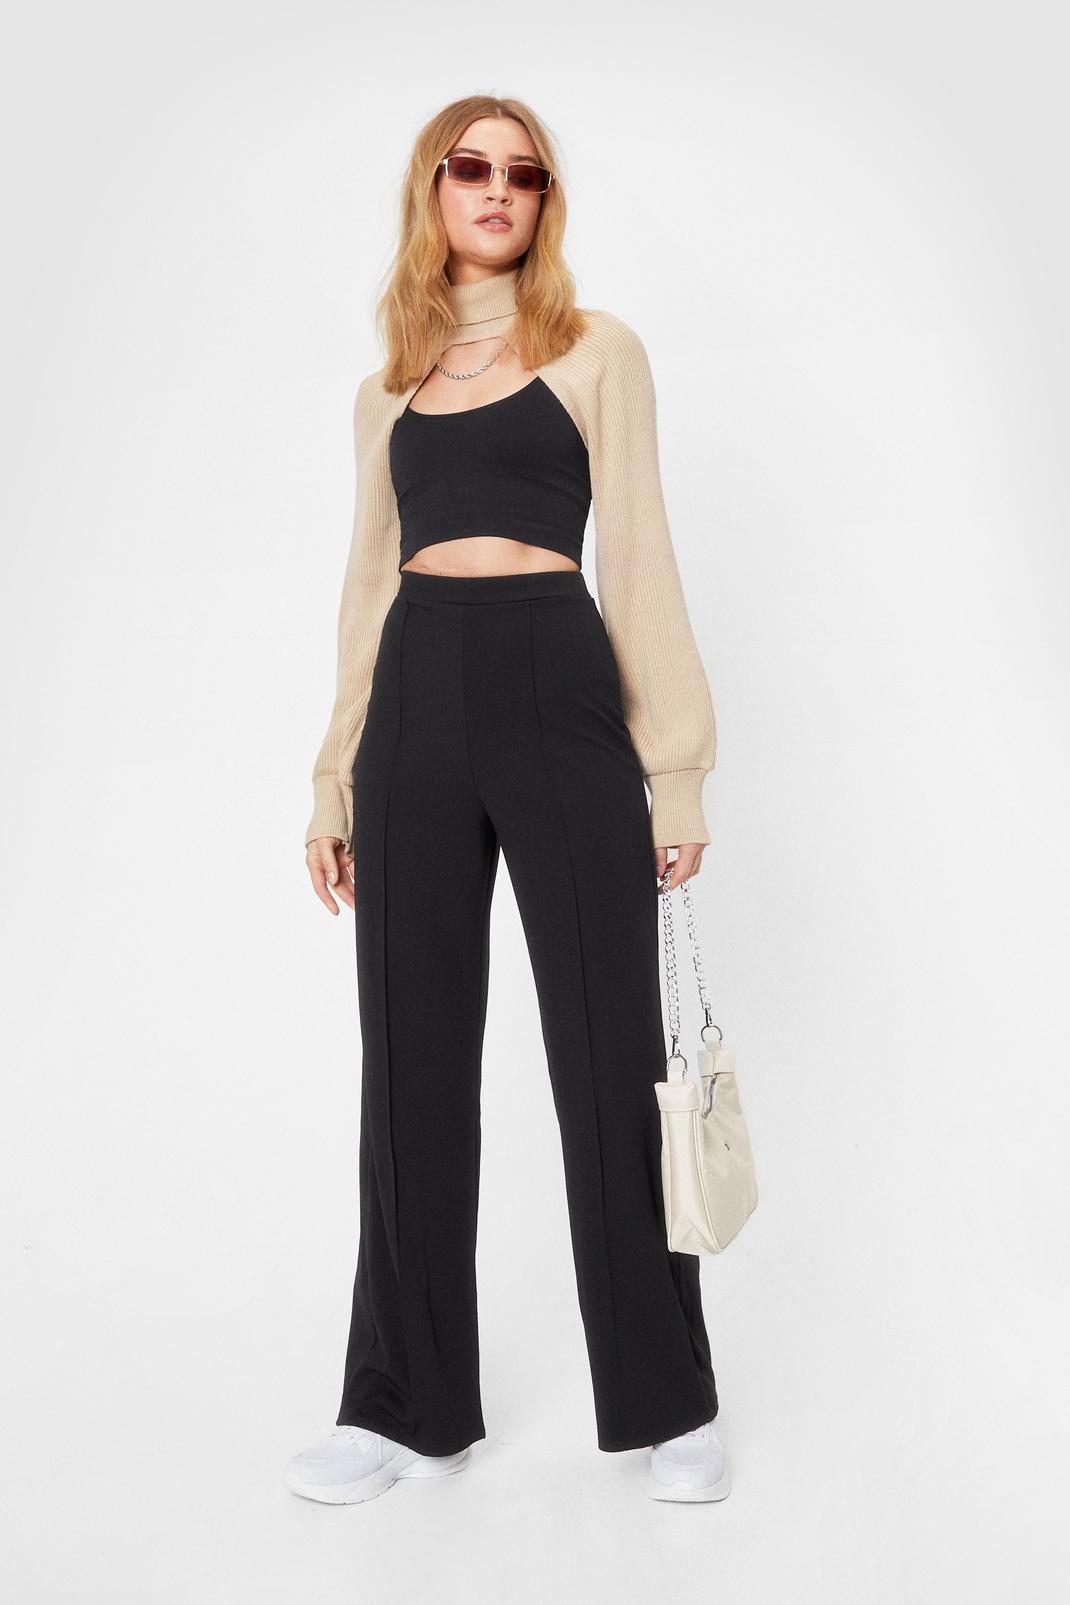 Black Seam You Lookin' High-Waisted Wide-Leg Pants image number 1